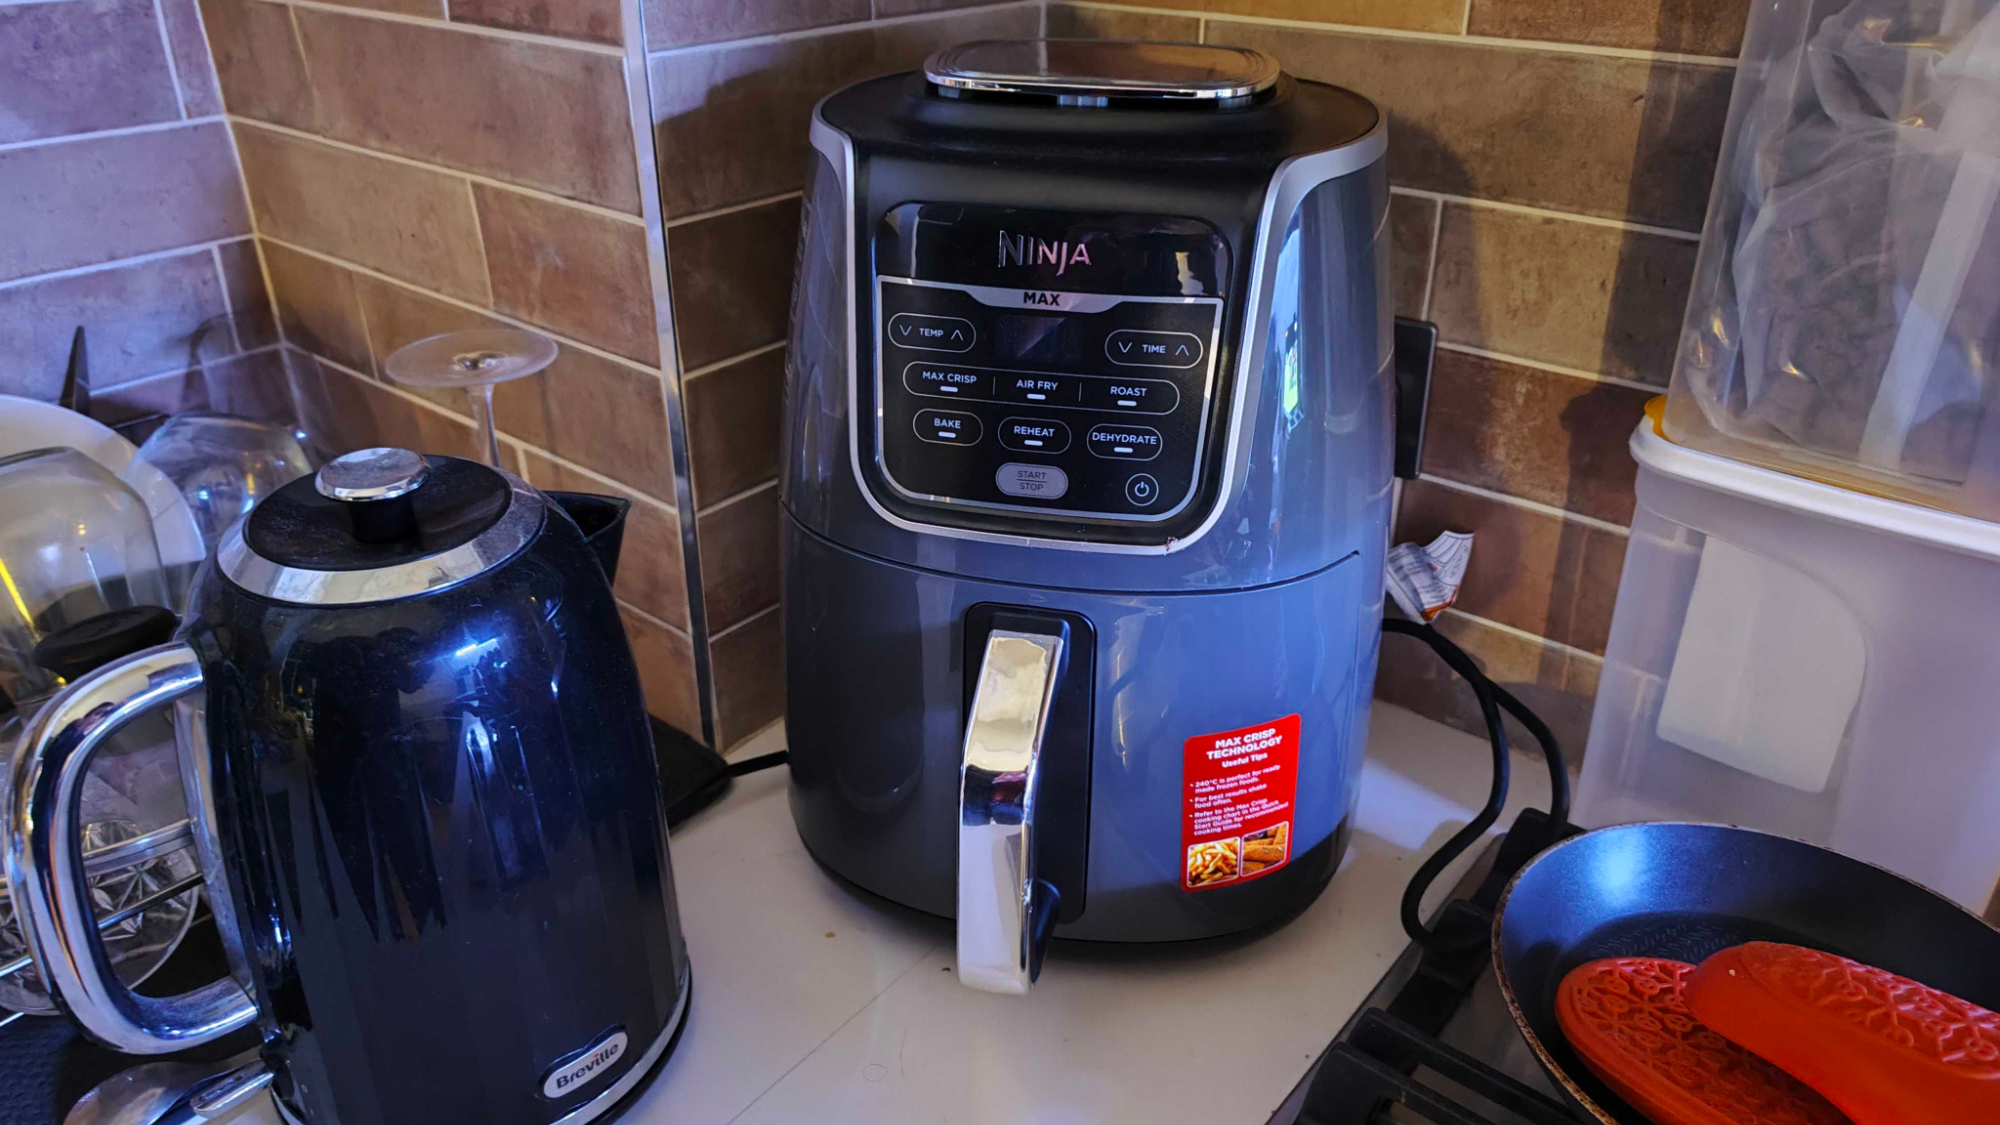 Ninja Air Fryer Max XL Review: Is It Worth The Hype? // All You Want To  Know 